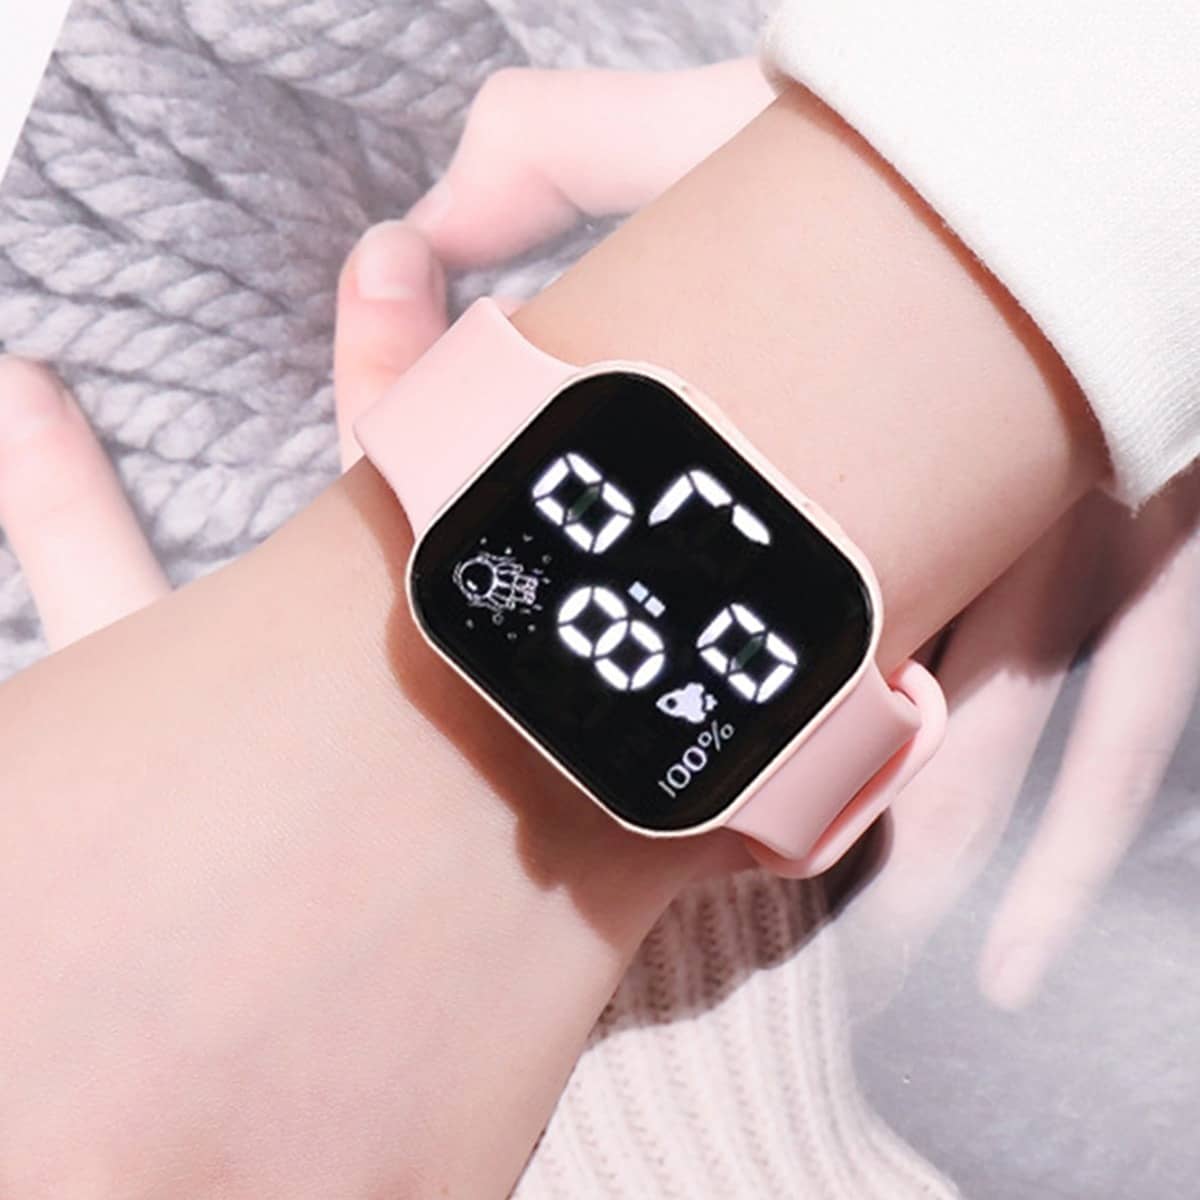 Men's Wrist Watches LED Digital Watch for Men Women Sports Army Military Silicone Watch Electronic Clock Hodinky Reloj Hombre